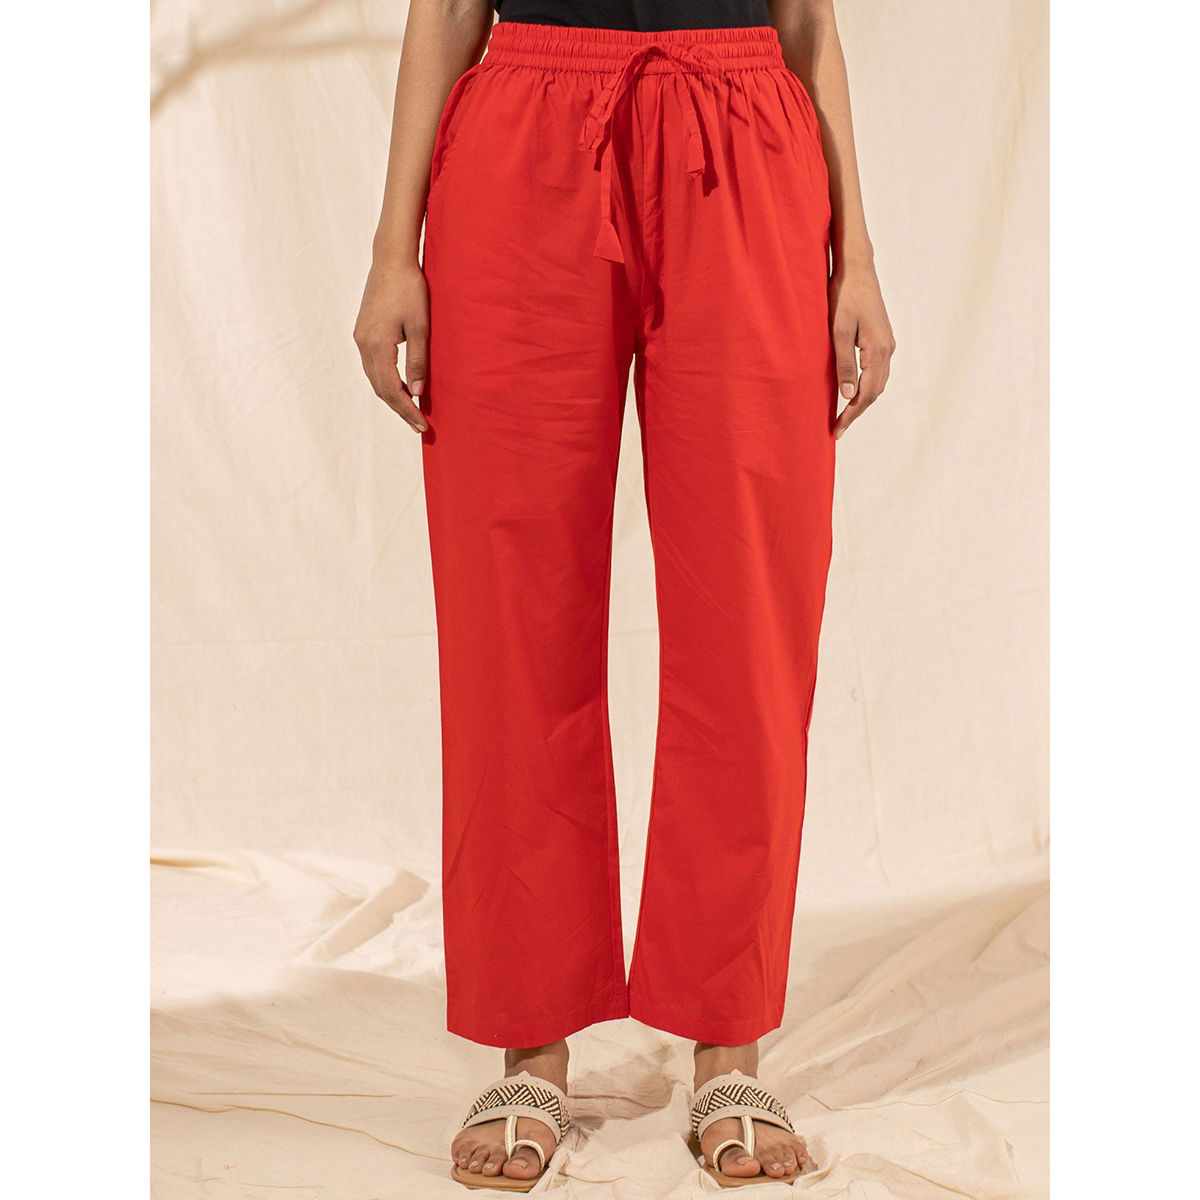 Buy Red High Rise Pants For Women Online in India  VeroModa